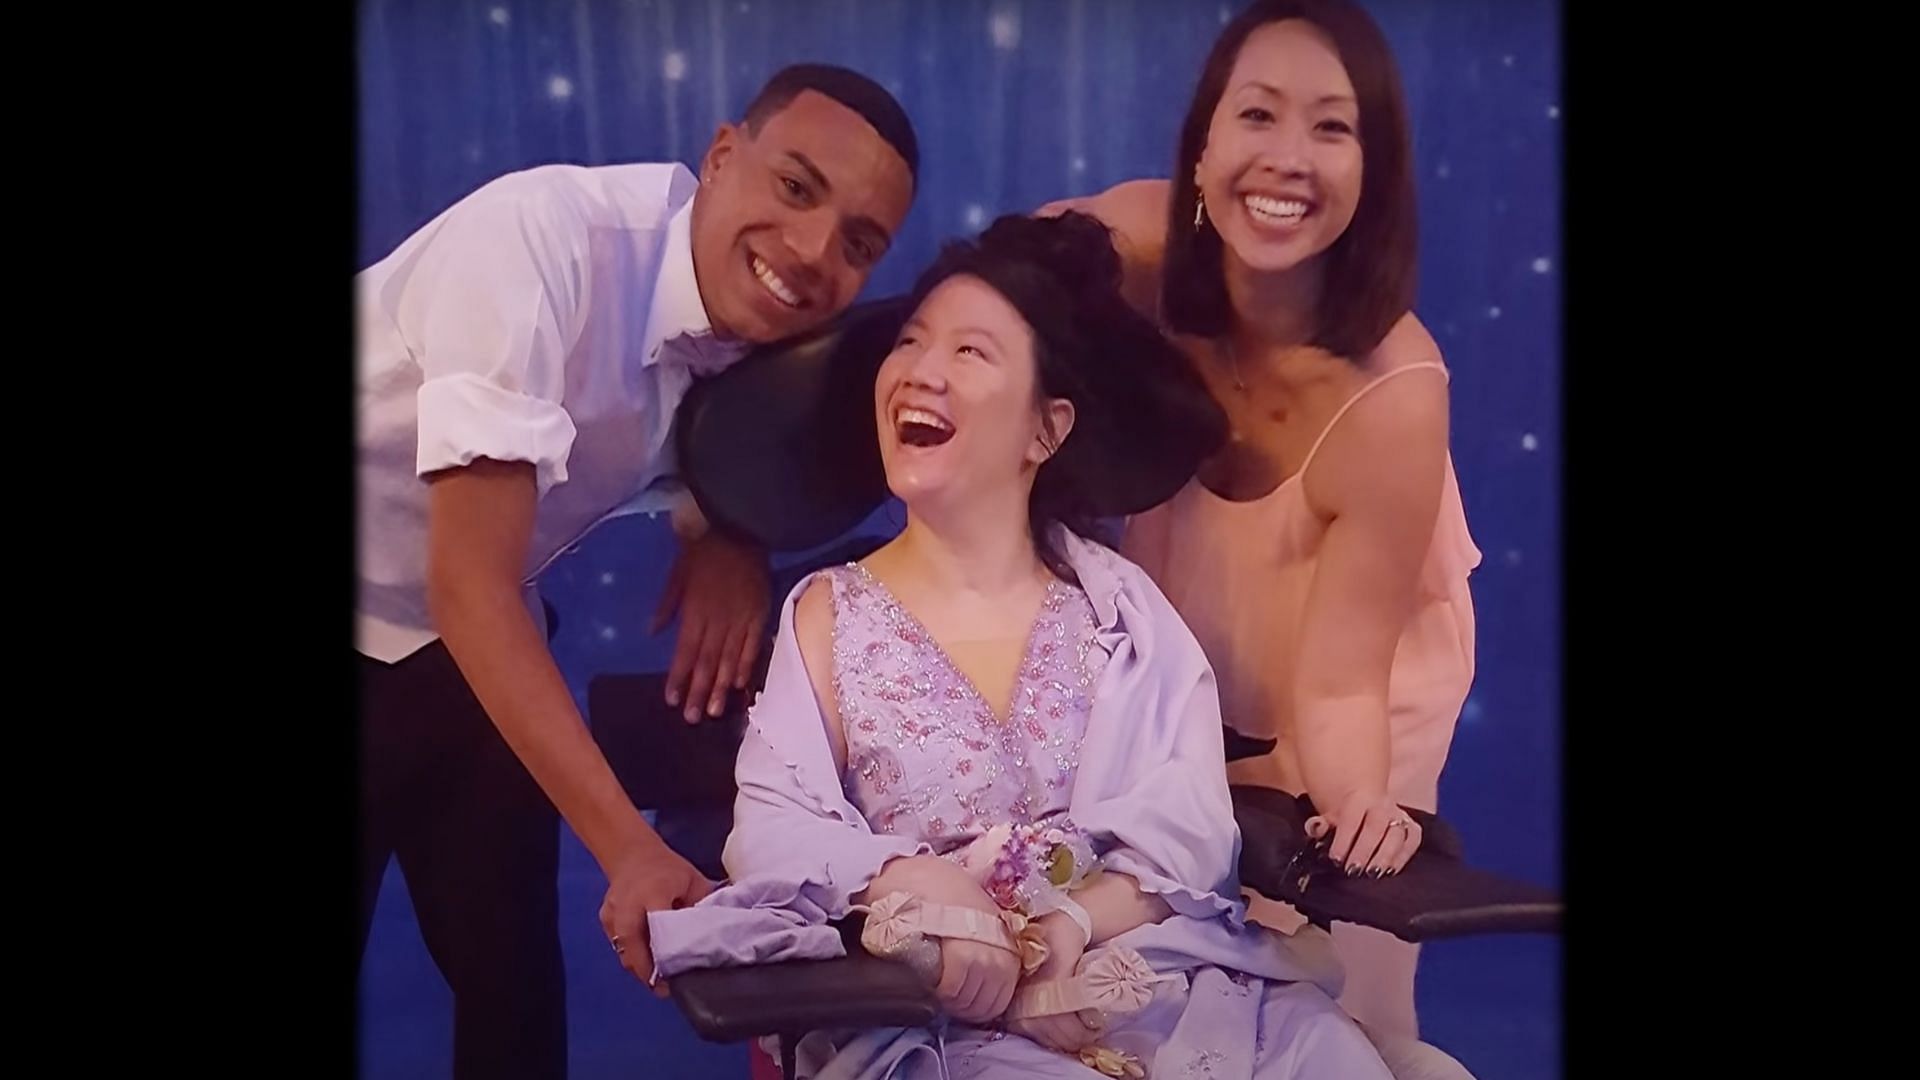 Assault victim Queena Phu at the 2008 high school prom with best friend Derrick Perez and sister Anna Donato (Image via Haunted Autopsy/YouTube)